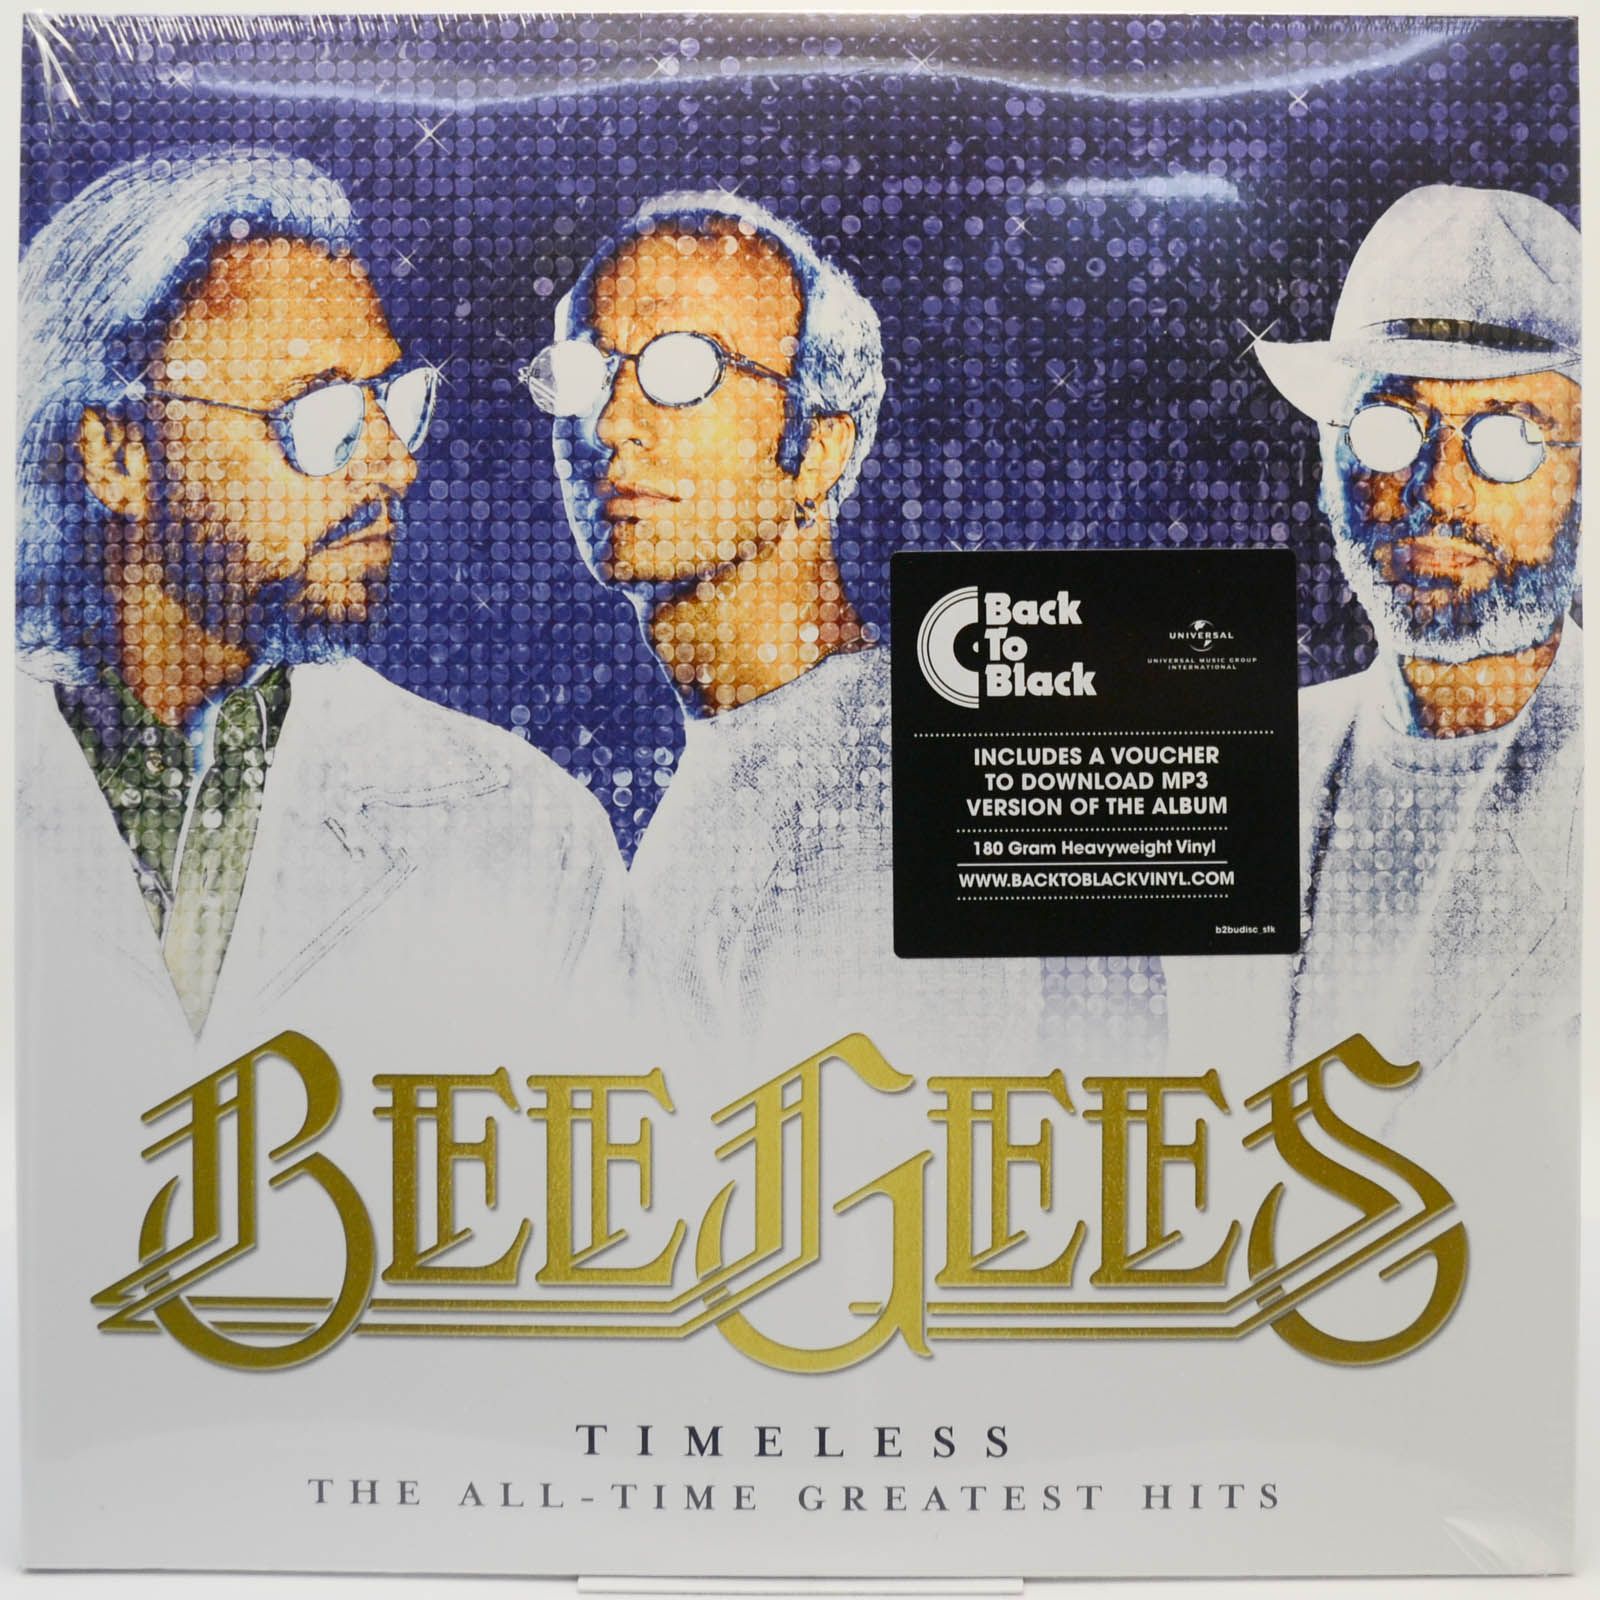 Bee Gees — Timeless (The All-Time Greatest Hits) (2LP), 2018